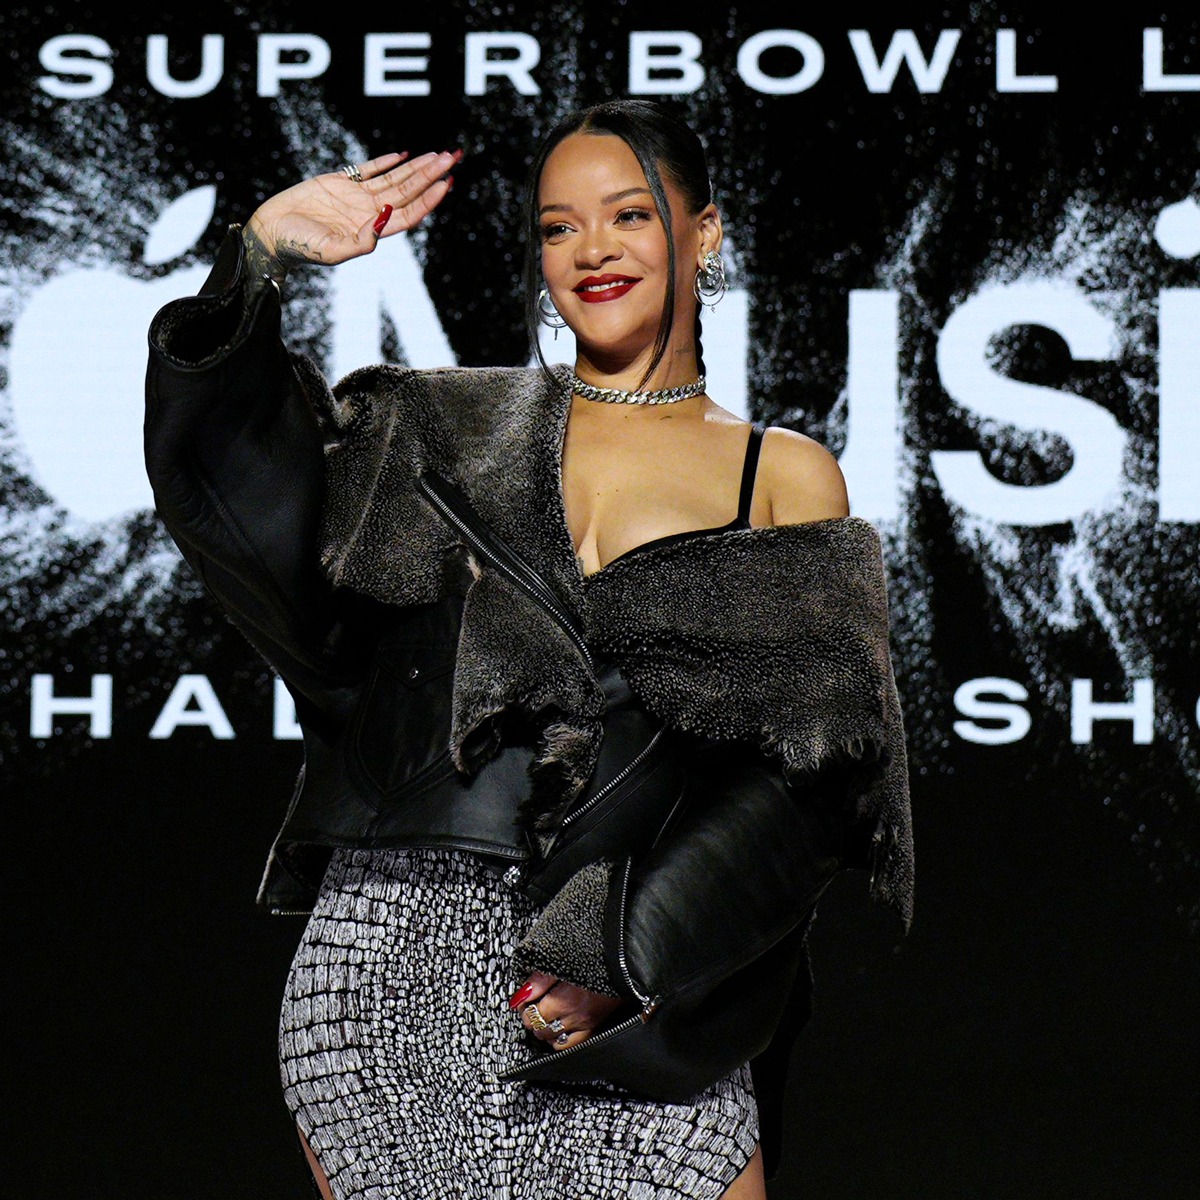 Rihanna Explains The "Weird" Direction Her New Music Could Go